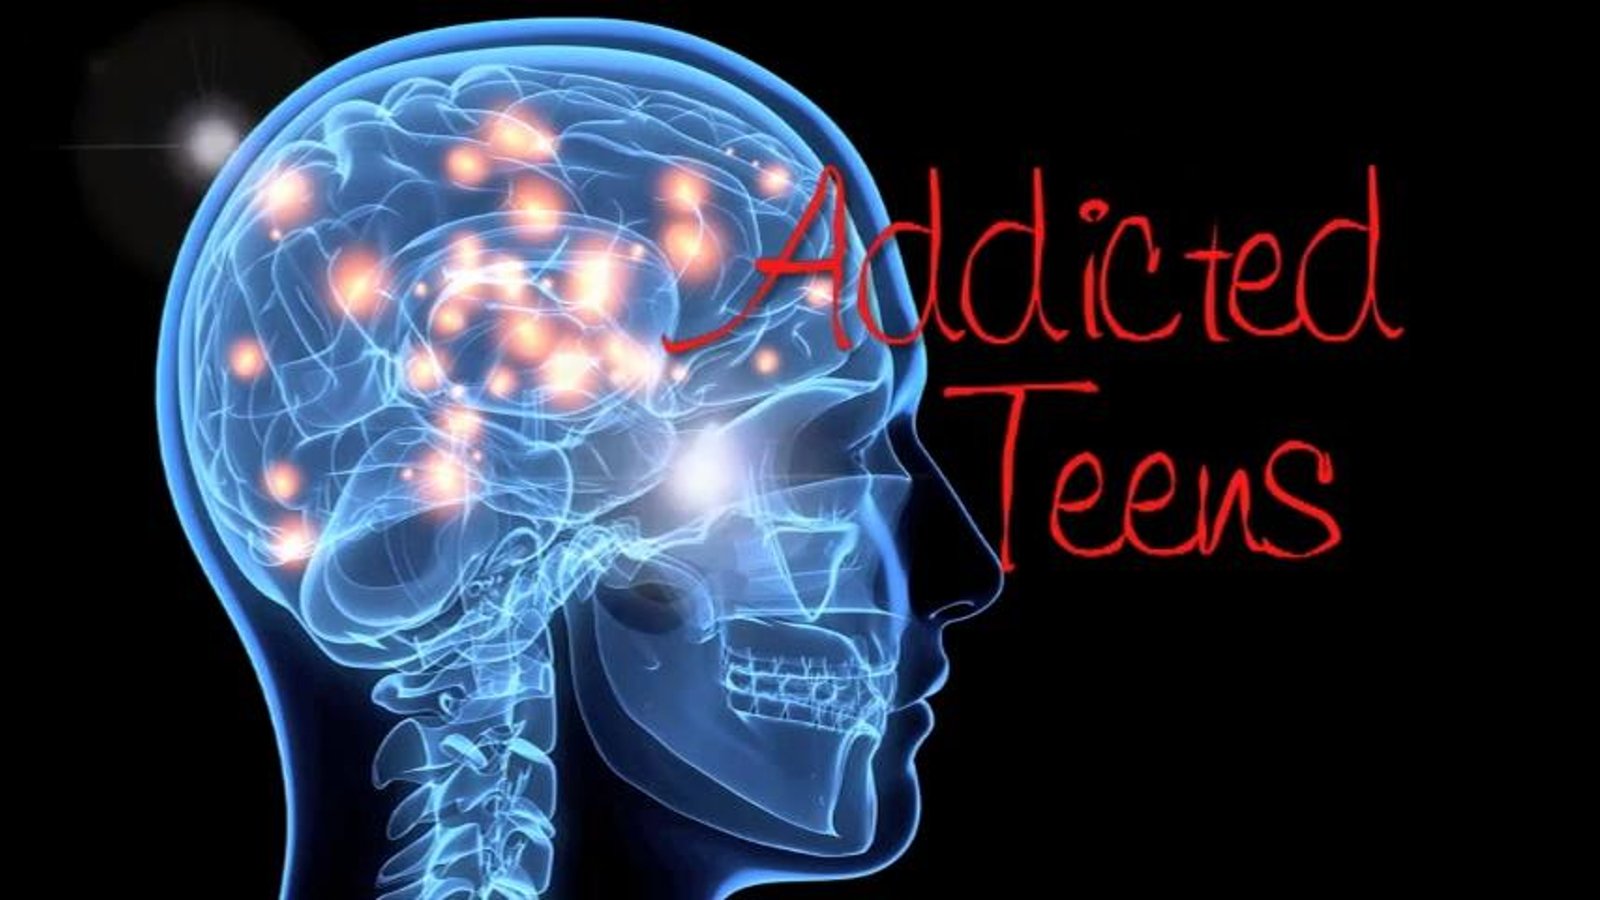 Addicted Teens - Personal Accounts of Substance Abuse Addictions